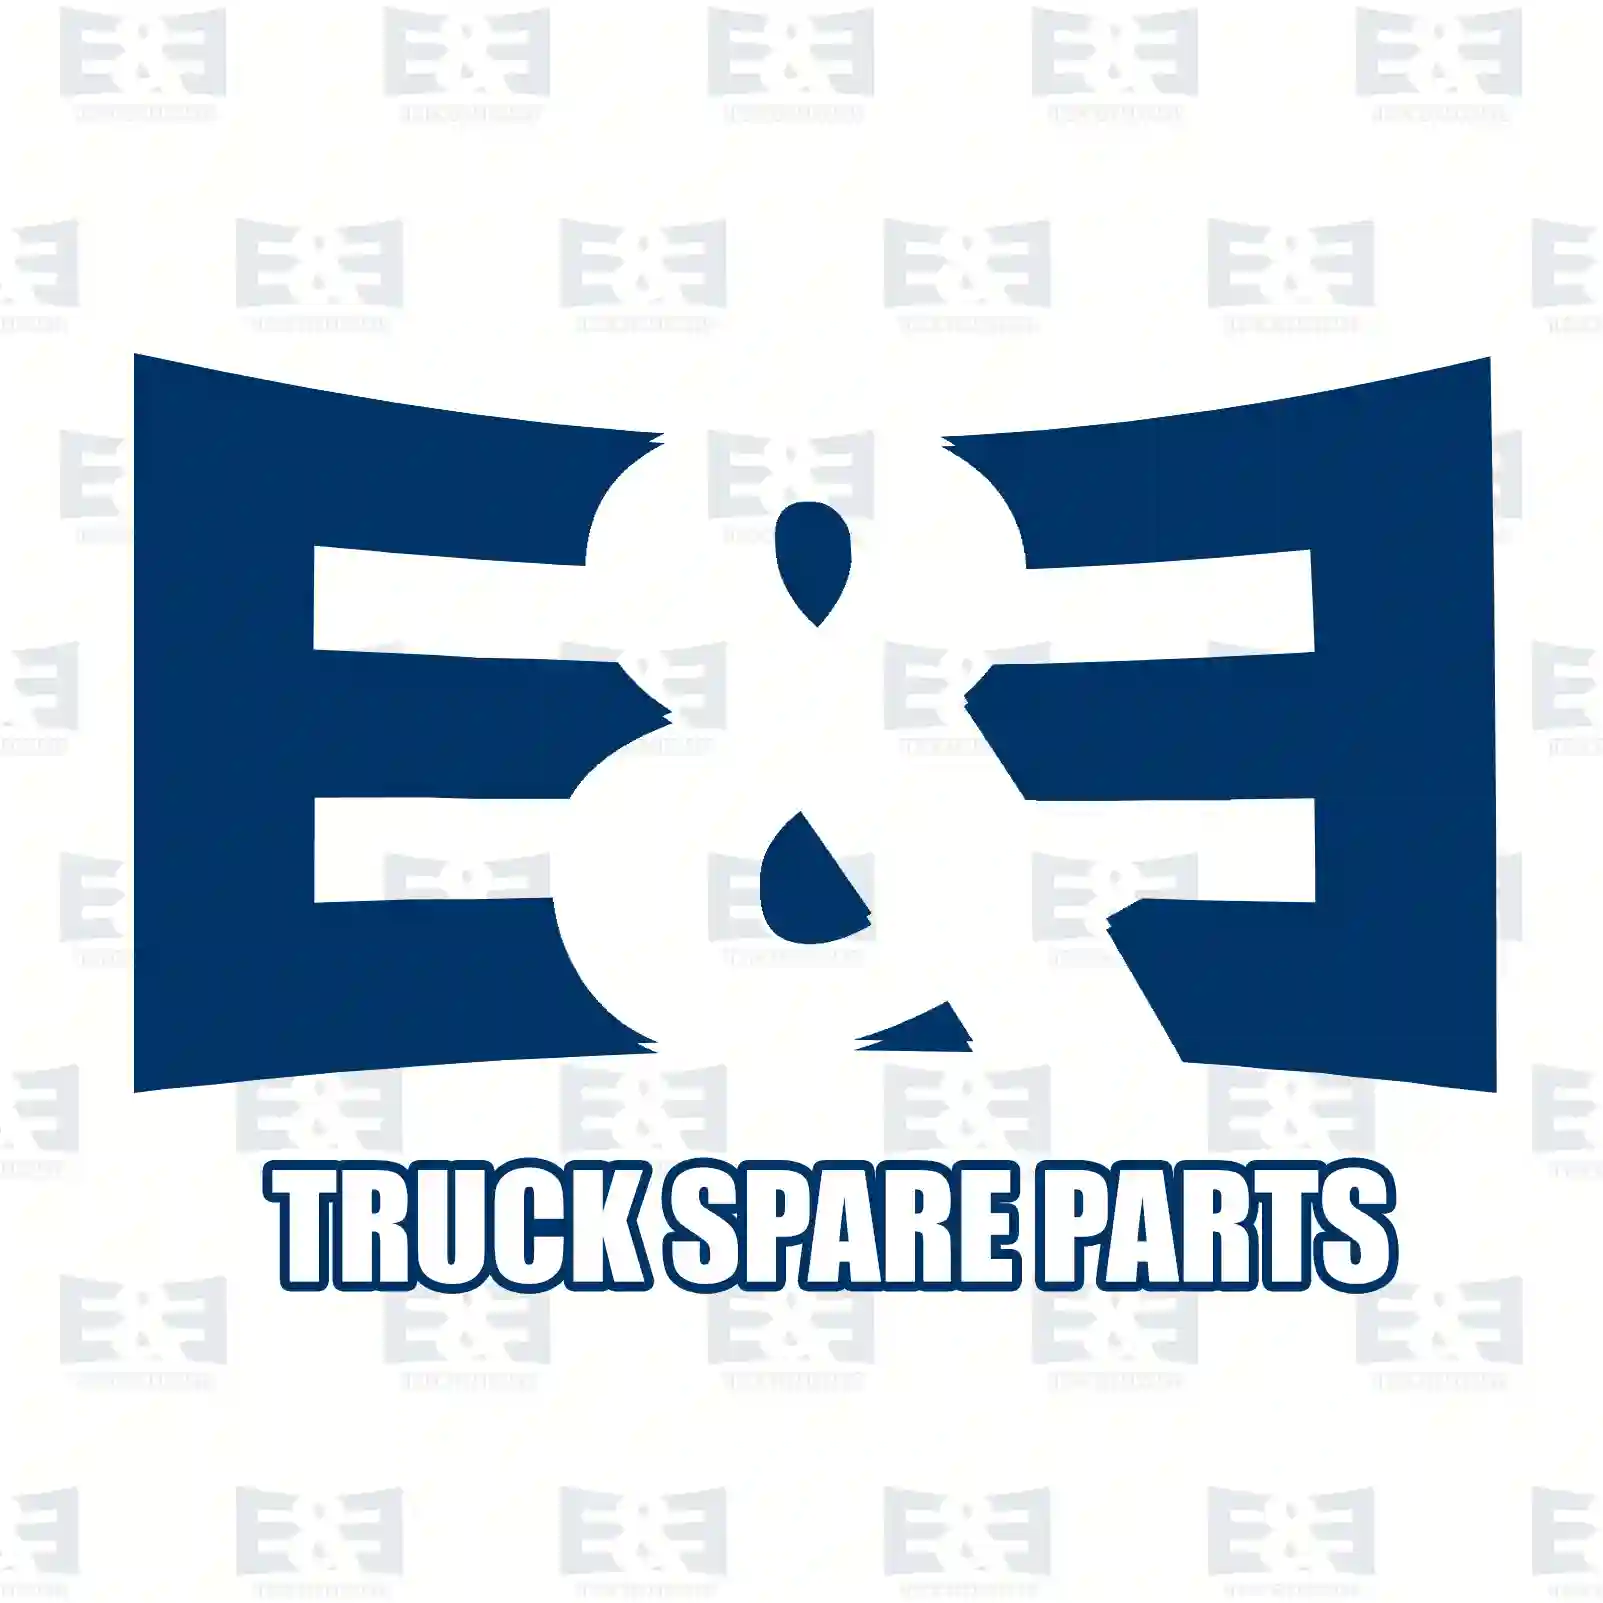 Brake Camshafts Seal ring, EE No 2E2297267 ,  oem no:4131000800, , E&E Truck Spare Parts | Truck Spare Parts, Auotomotive Spare Parts